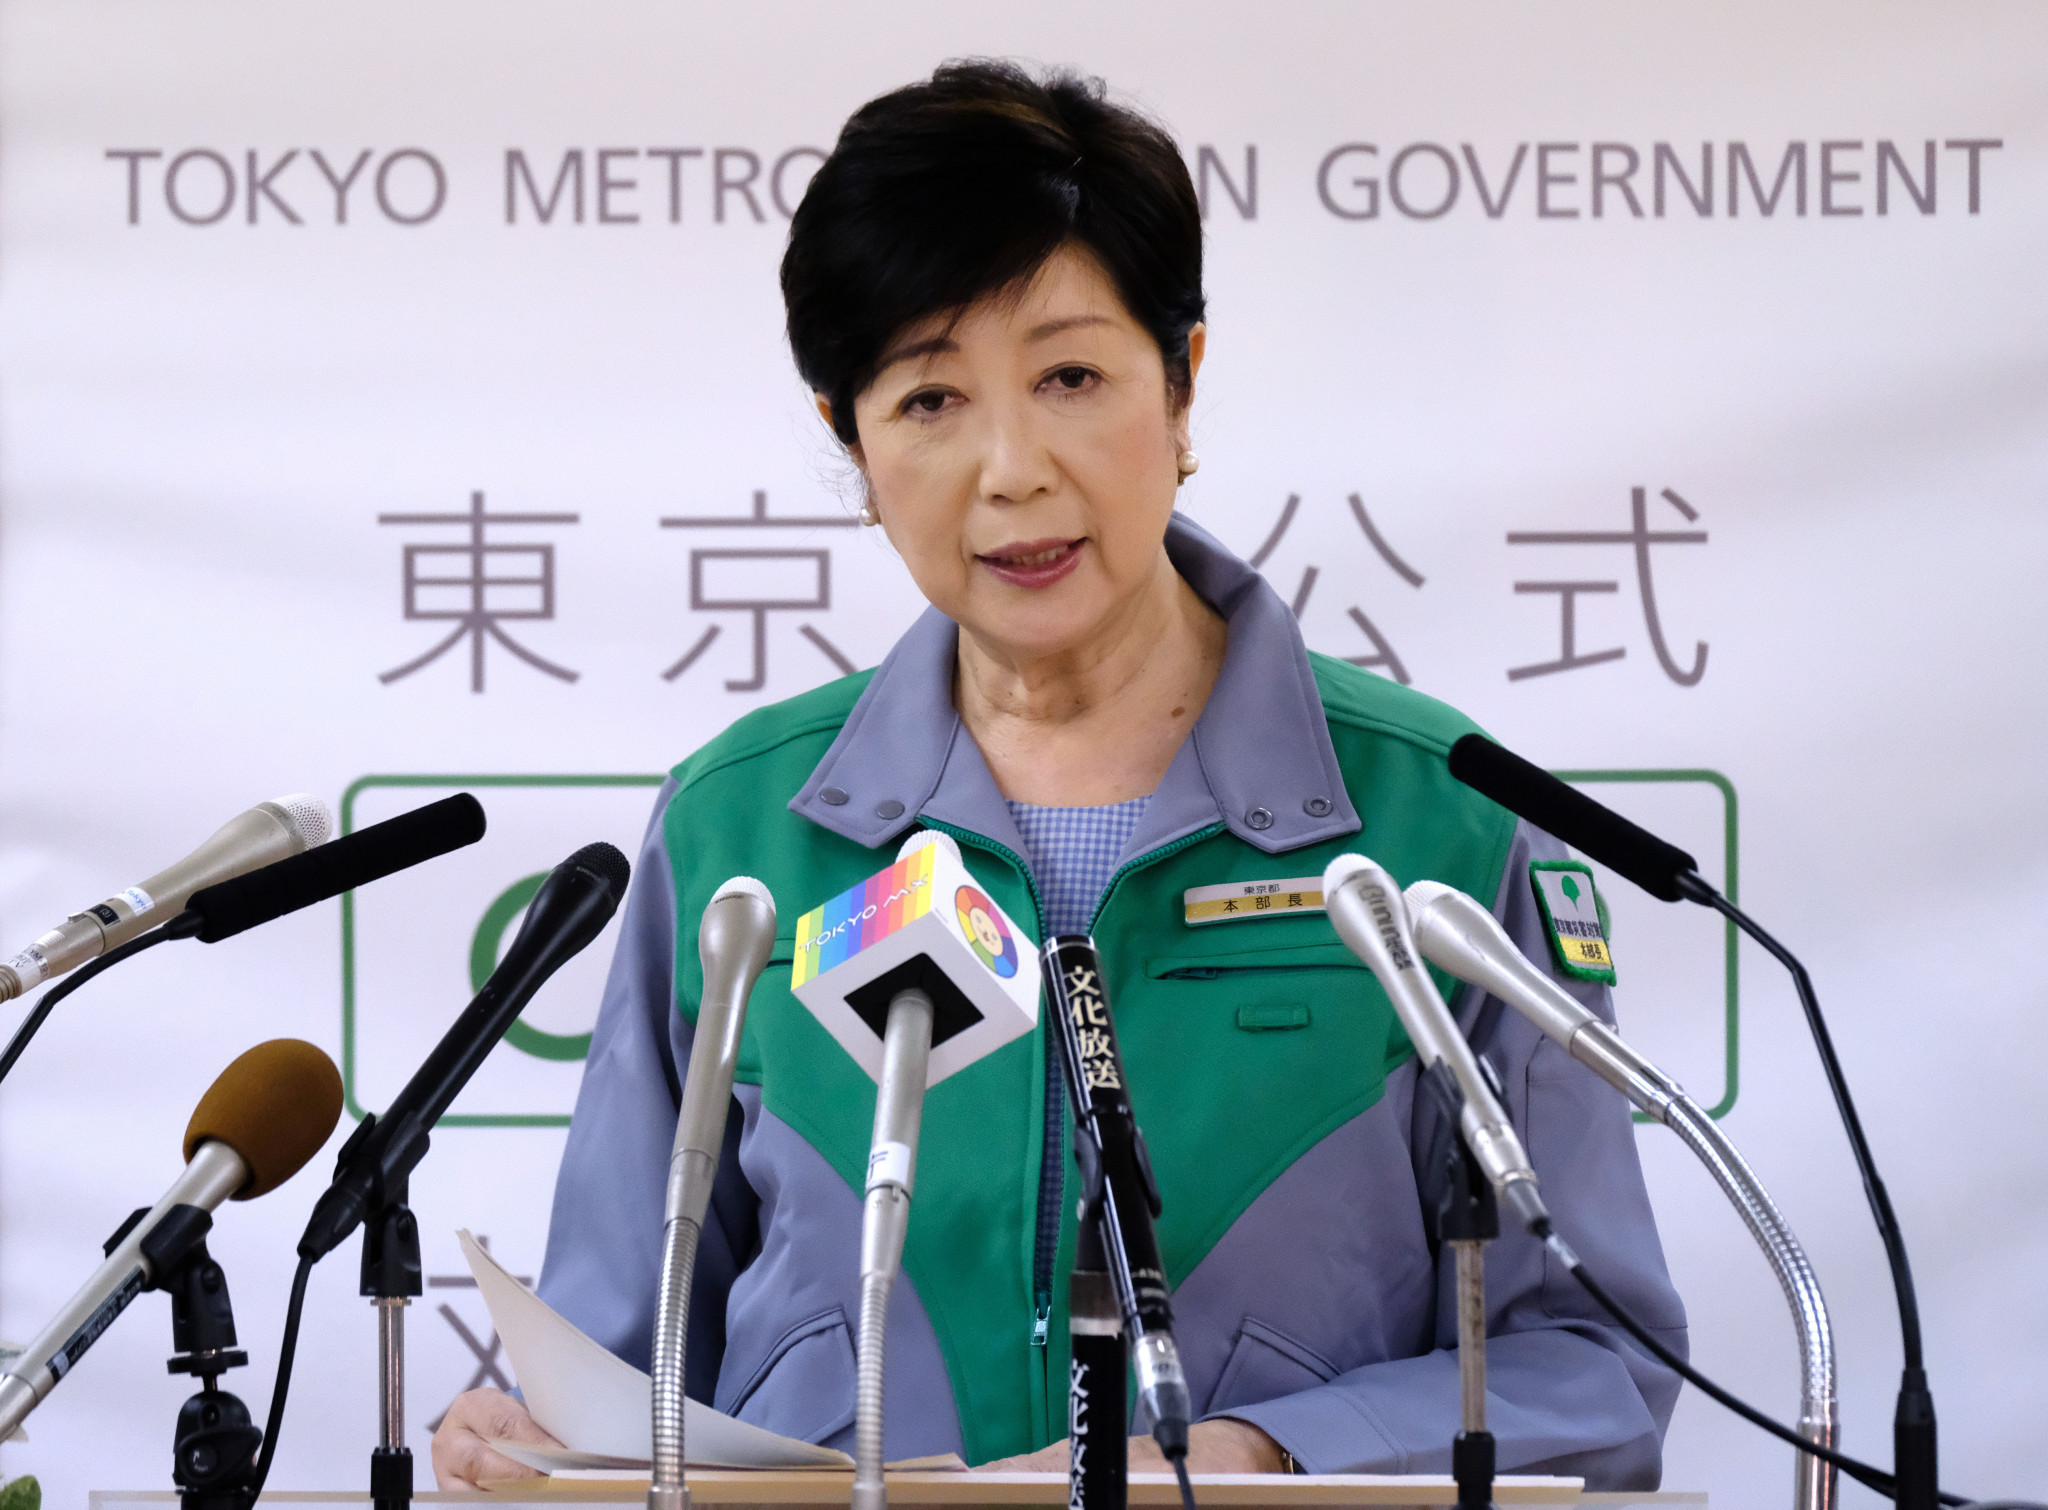 Tokyo Governor Yuriko Koike has suggested the coronavirus situation is improving in Japan ©Getty Images